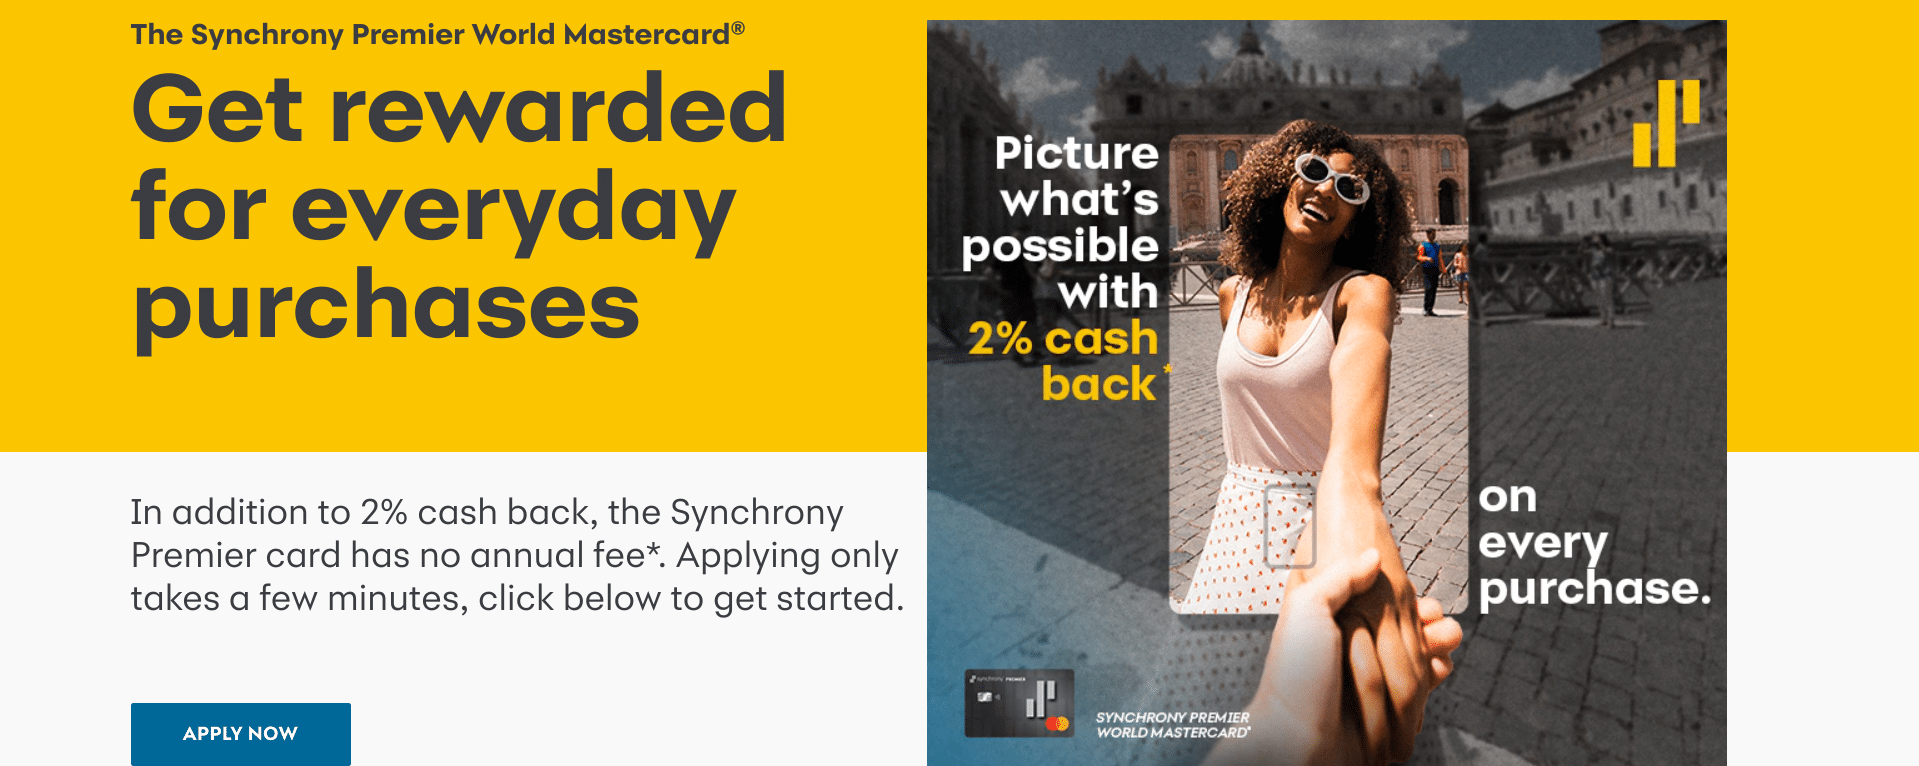 Screenshot of the marketing copy for the Synchrony Premier World Mastercard®